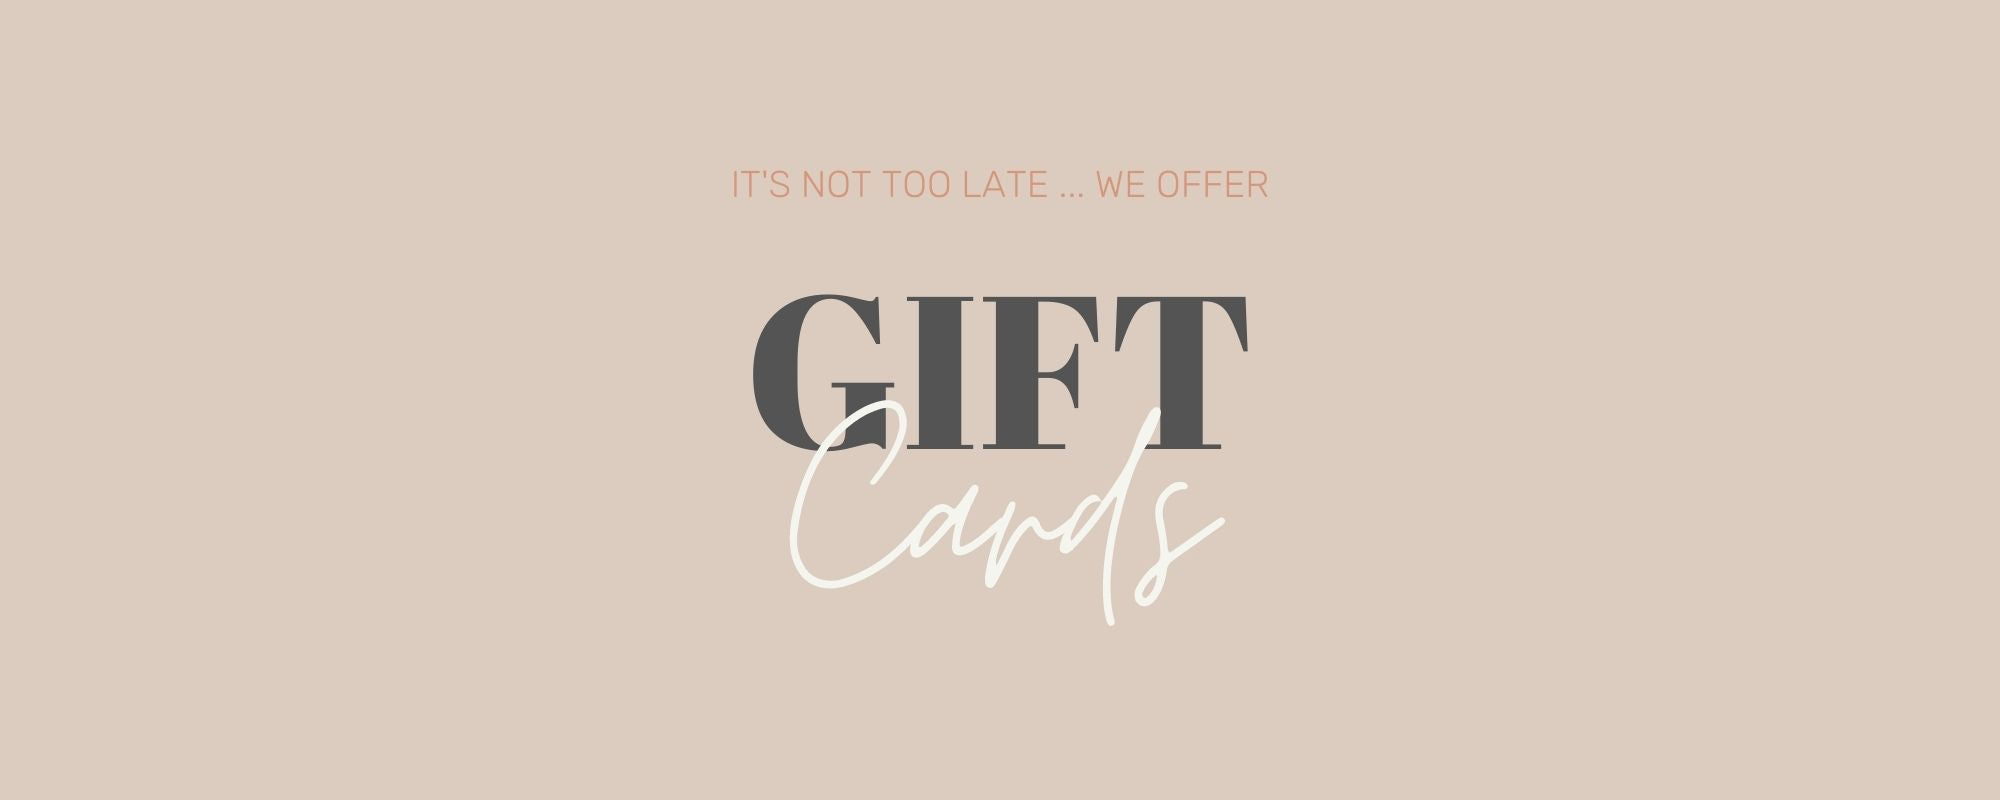 Never too late - we sell VIRTUAL GIFT CARDS! 🎉